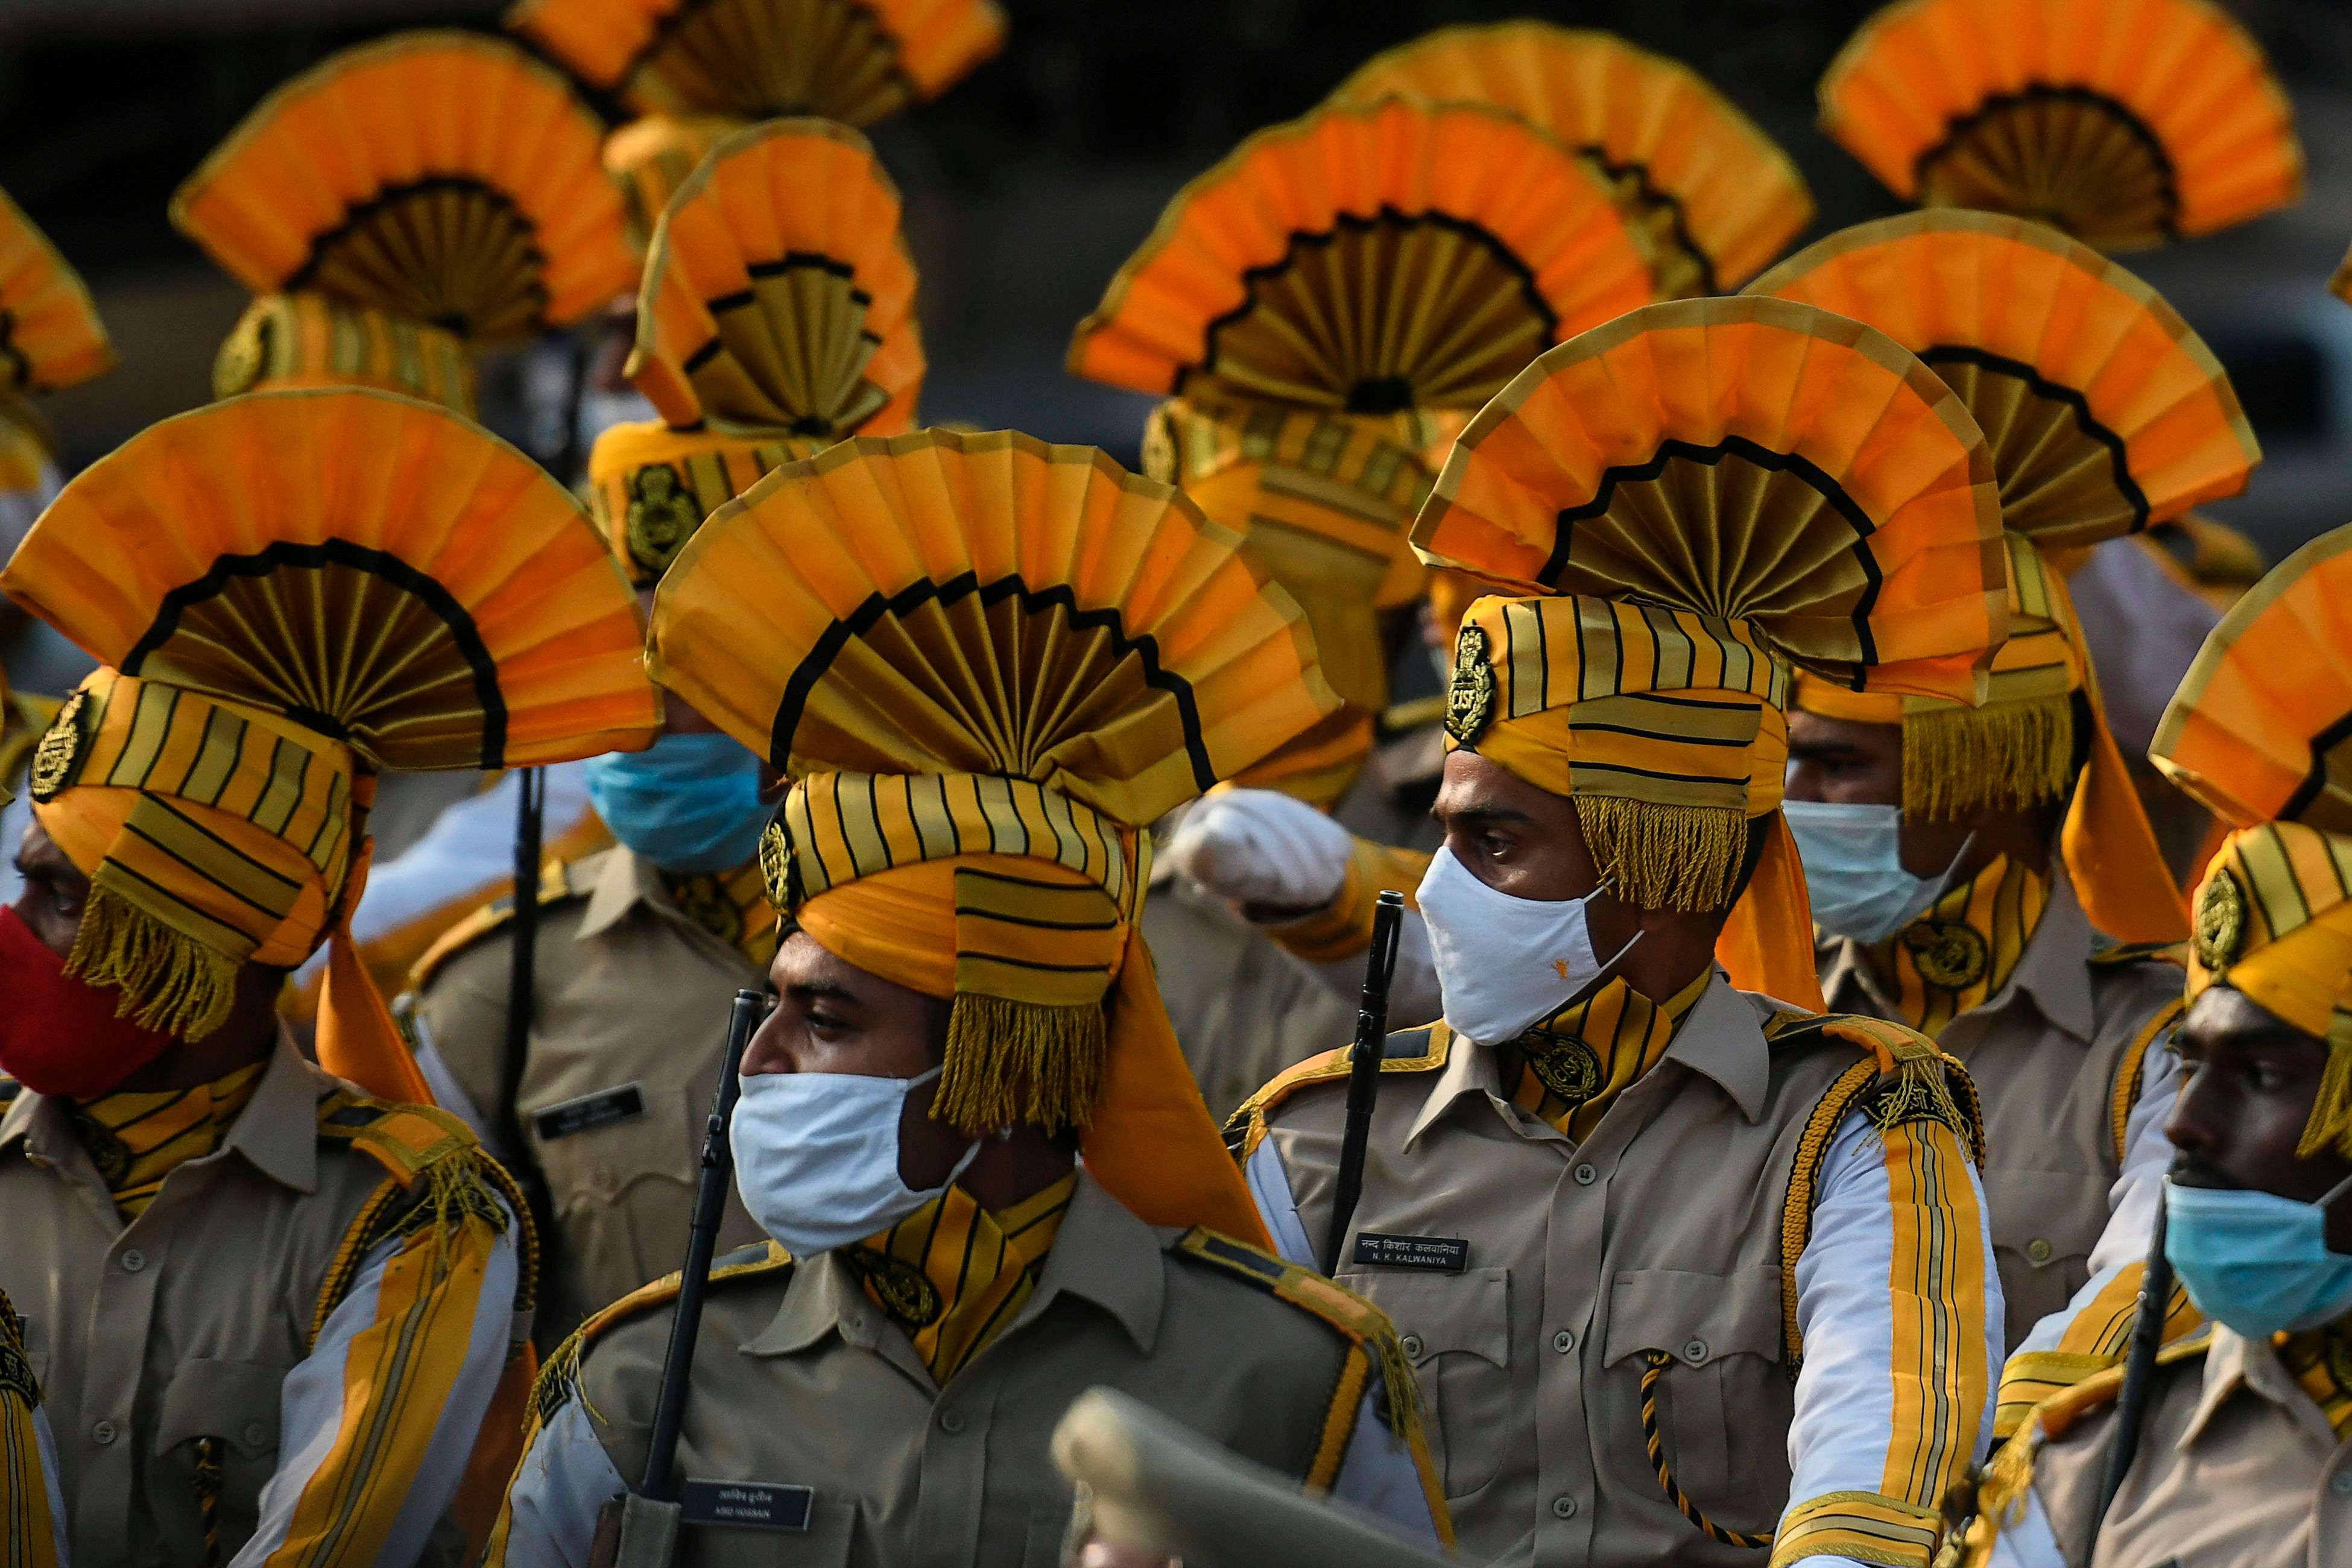 Cadets of Central Industrial Security Force (CISF) march during a full dress rehearsal for the upcoming Republic Day Parade in Chennai on January 24, 2021. Credit: AFP Photo